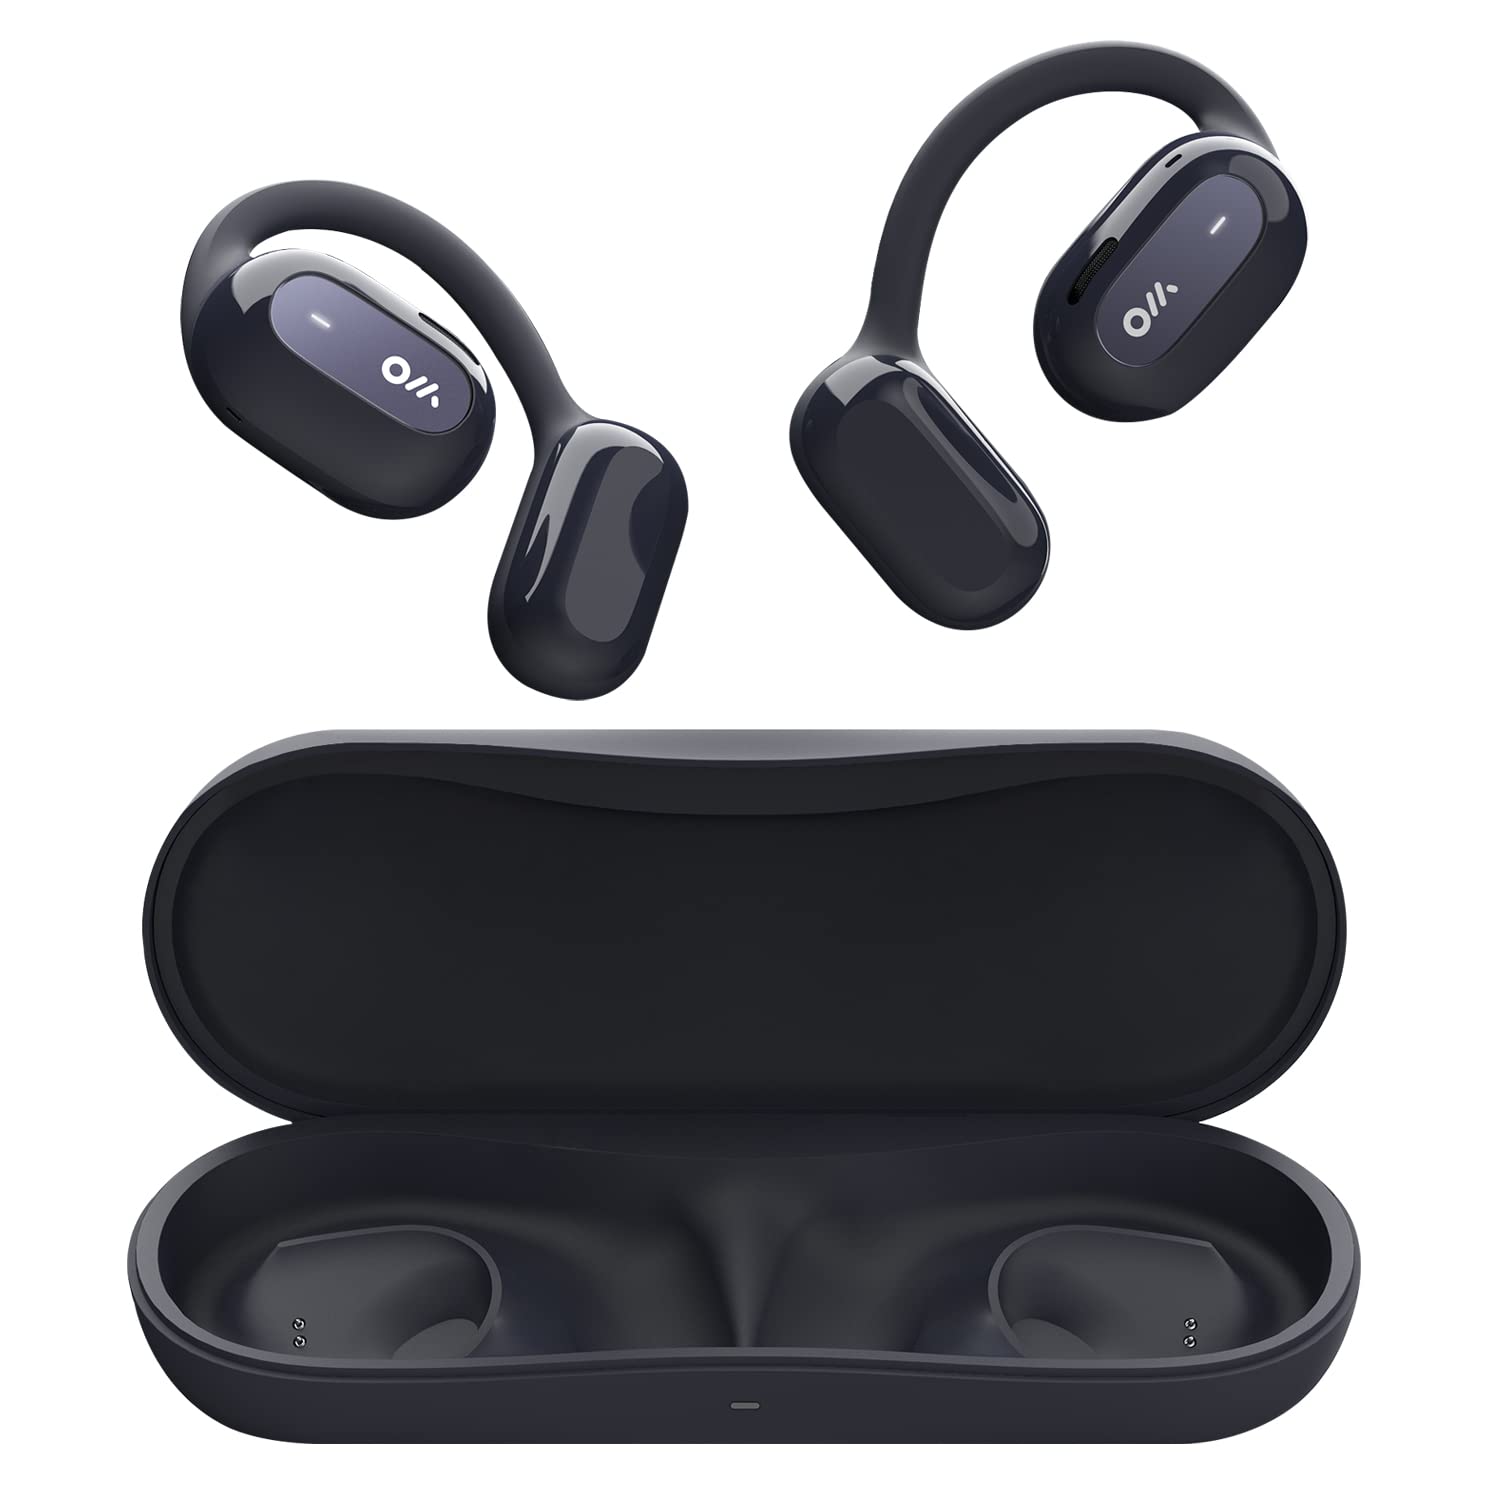 Oladance Open Ear Headphones Bluetooth 5.2 Wireless Earbuds for Android & iPhone, Open Ear Earbuds with Dual 16.5mm Dynamic Drivers, Up To 16 Hours Playtime Waterproof Sport Earbuds -Interstellar Blue